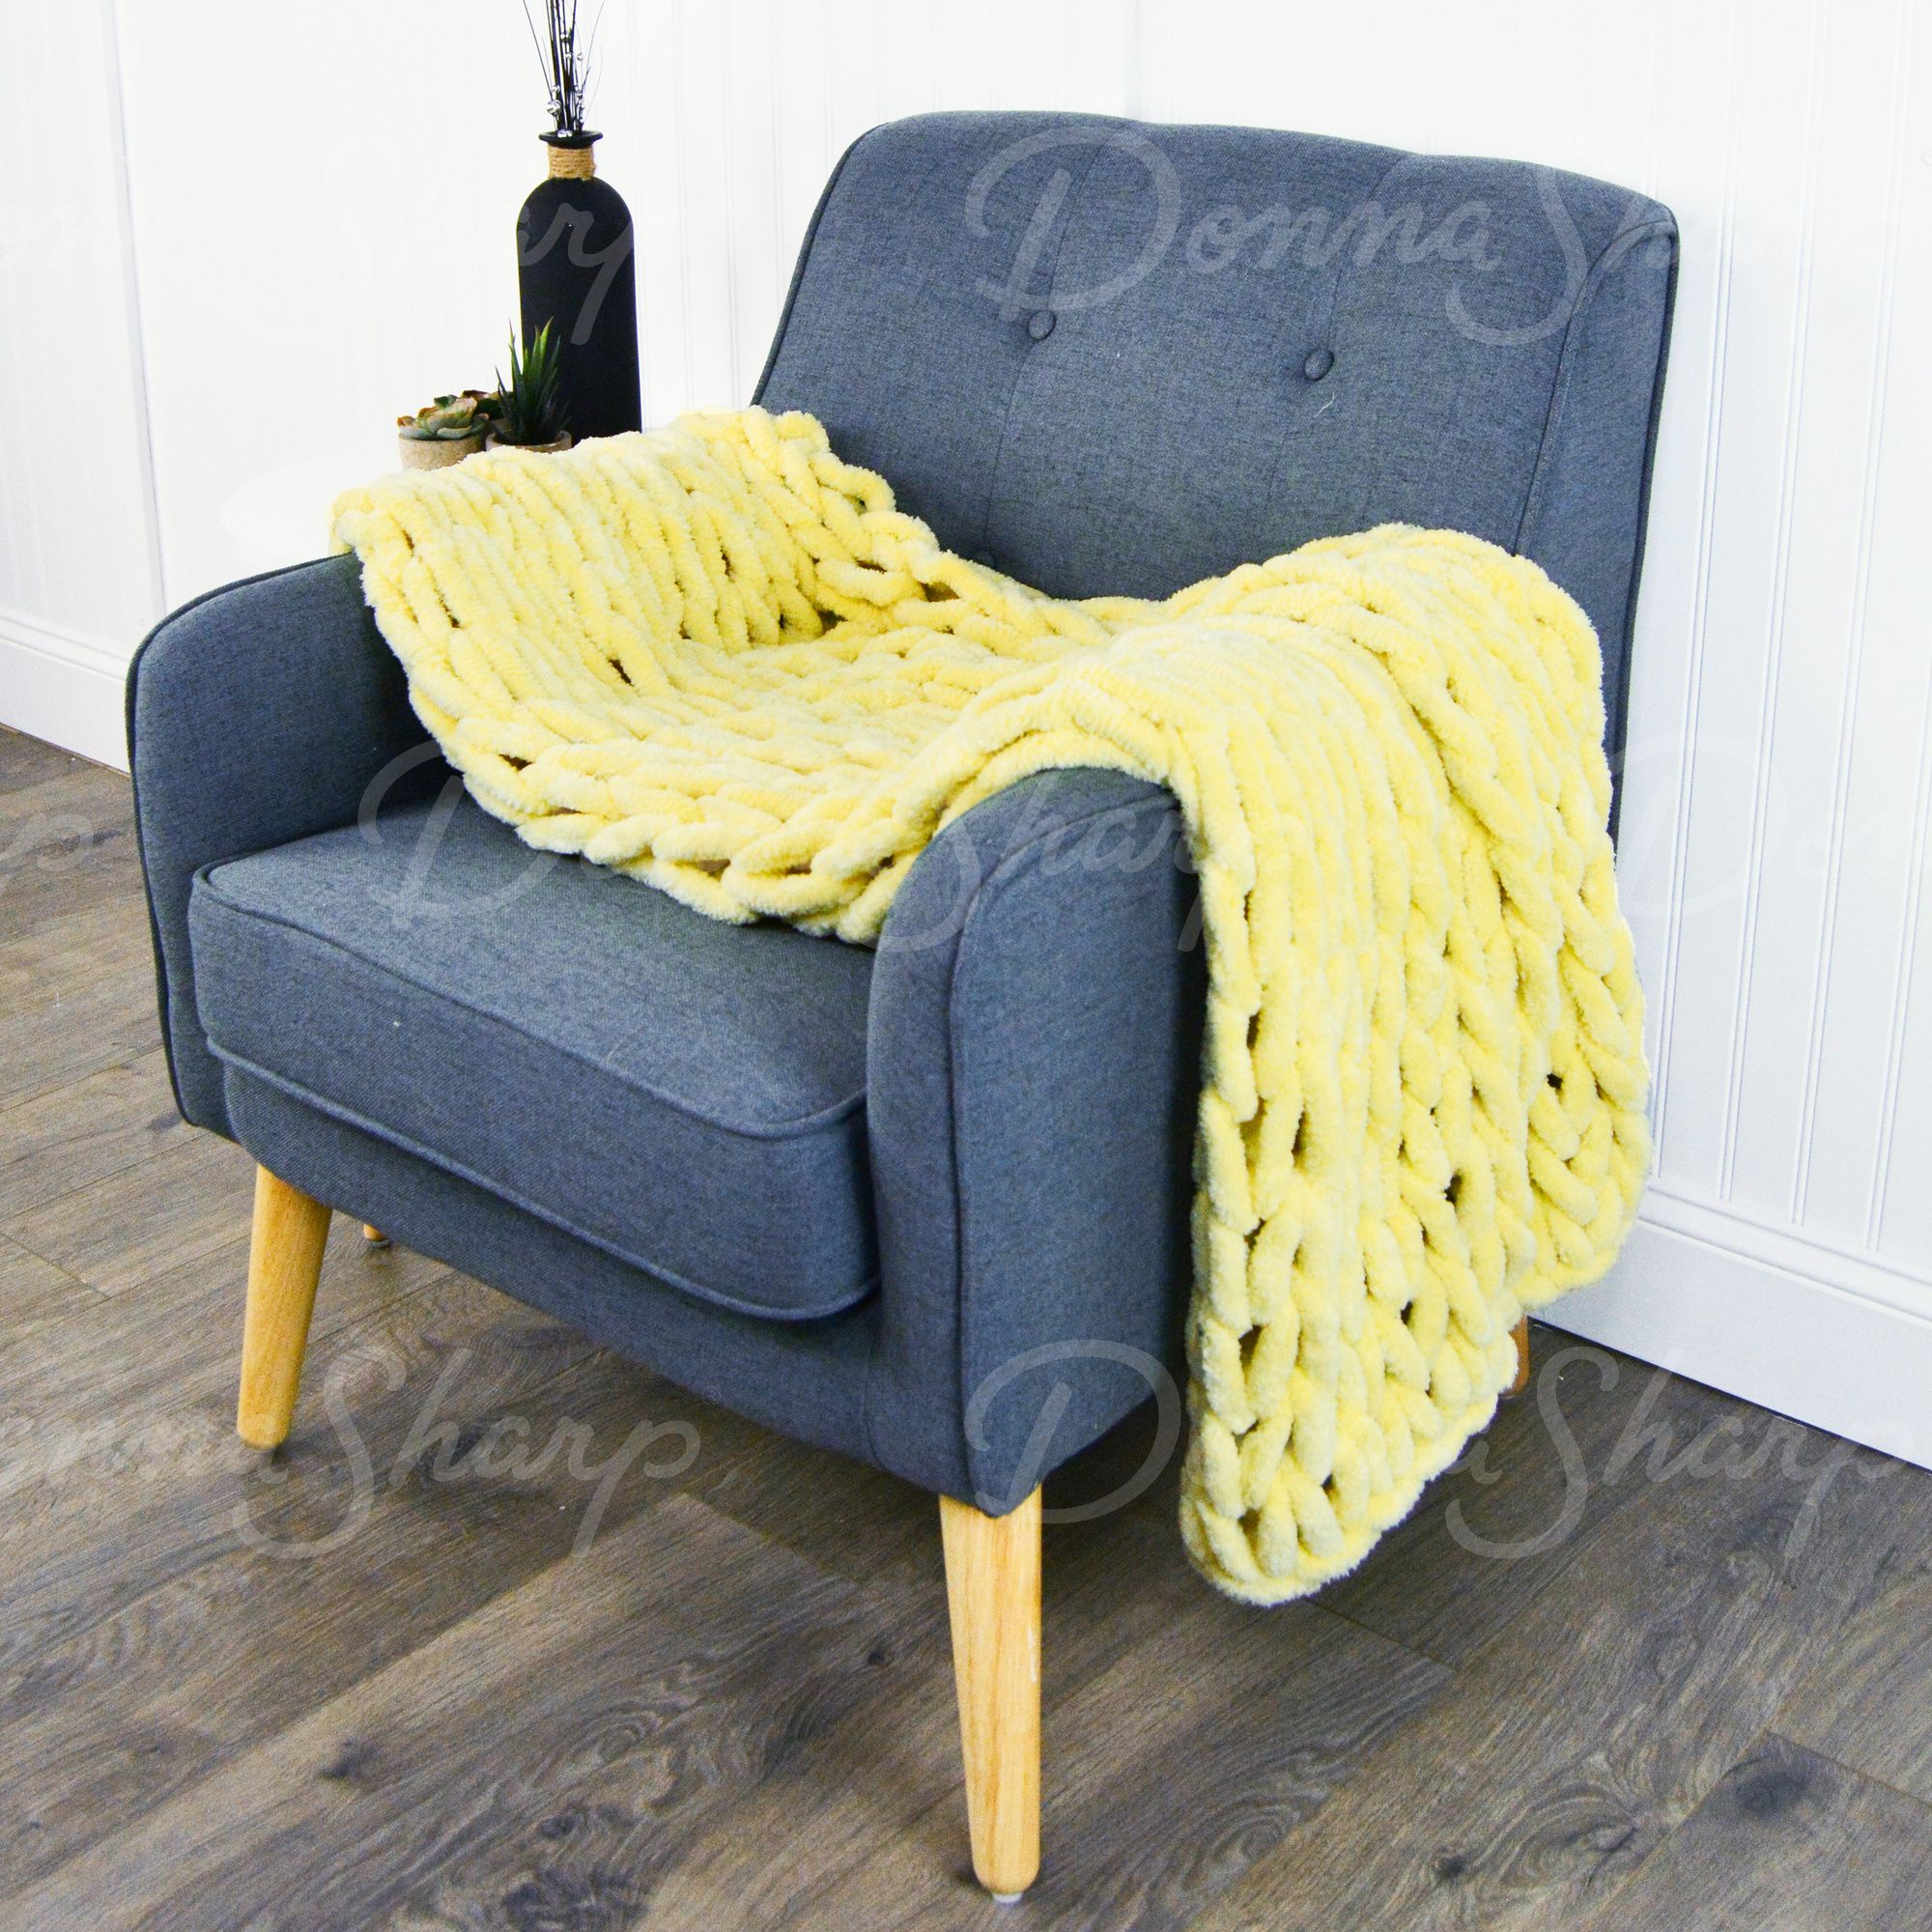 Chenille Knit Throws